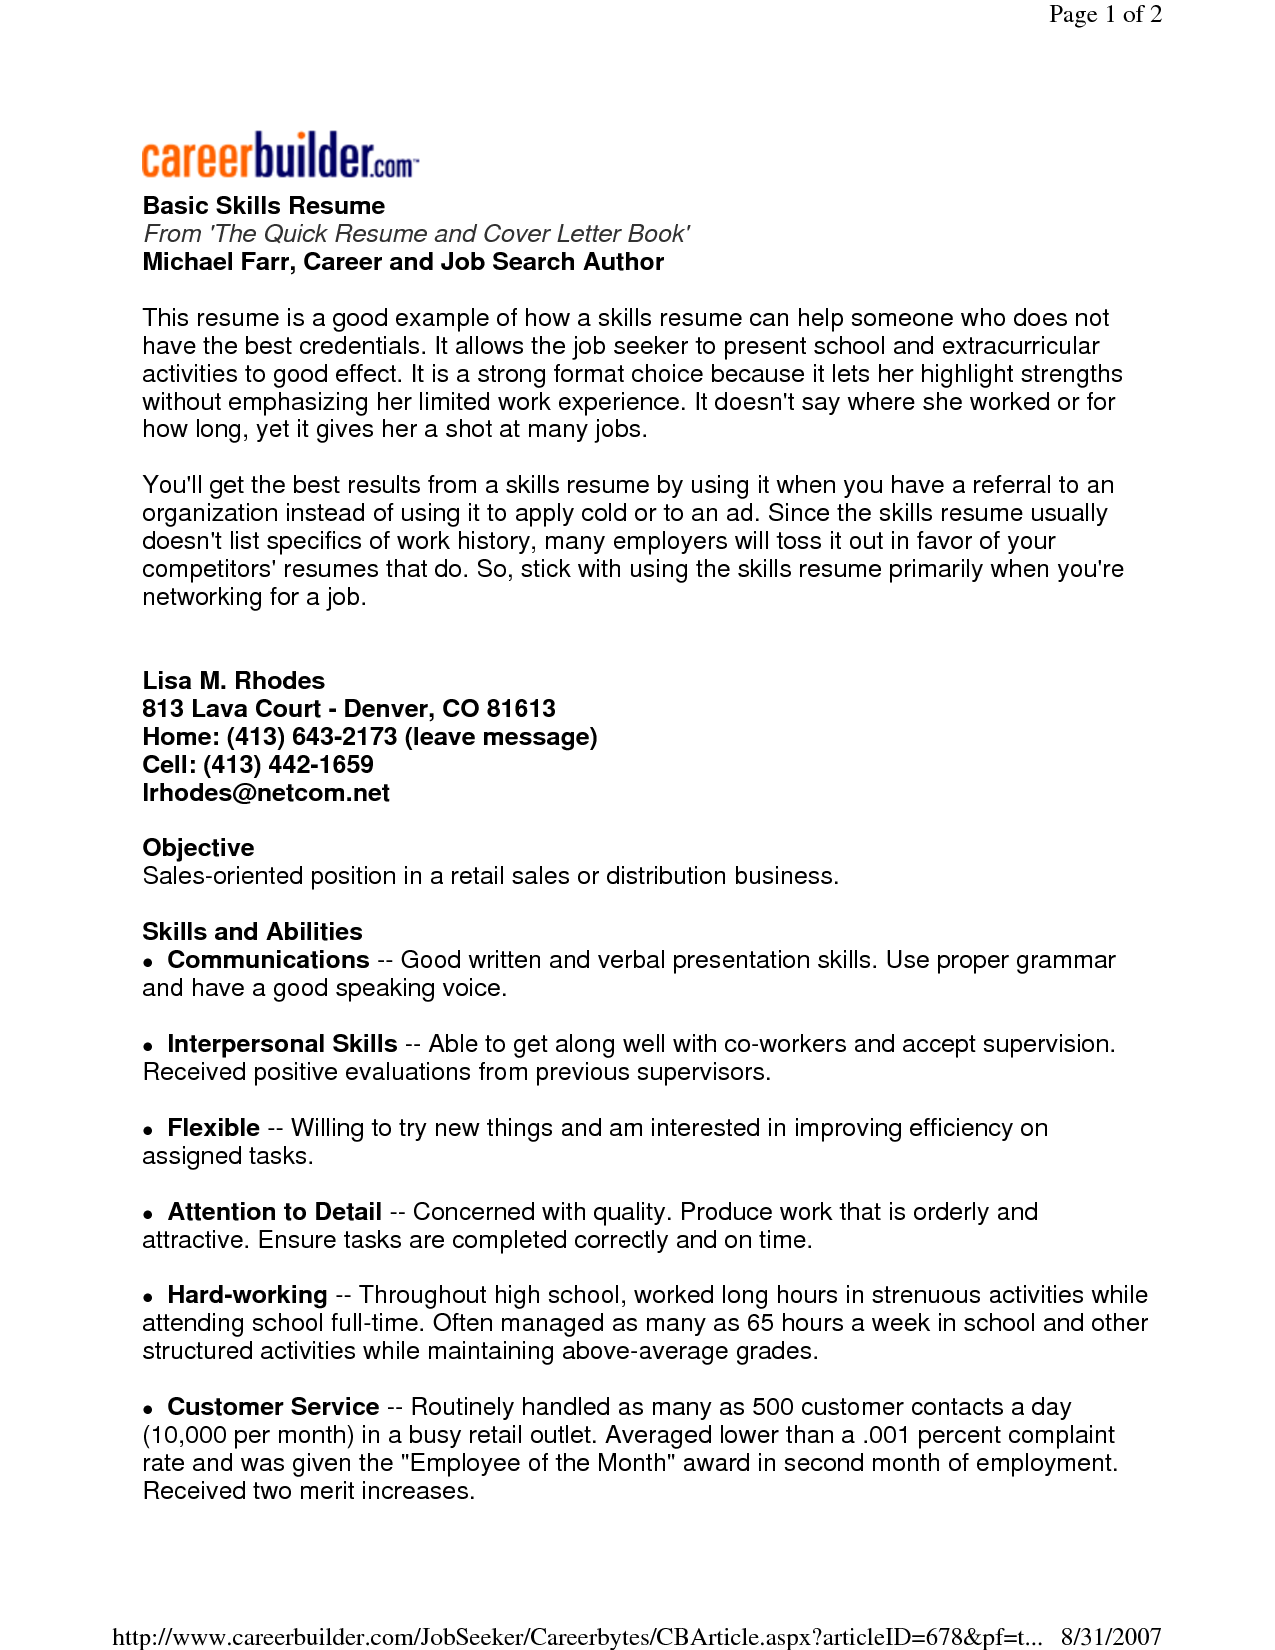 find here the sample resume that best fits your profile in order to